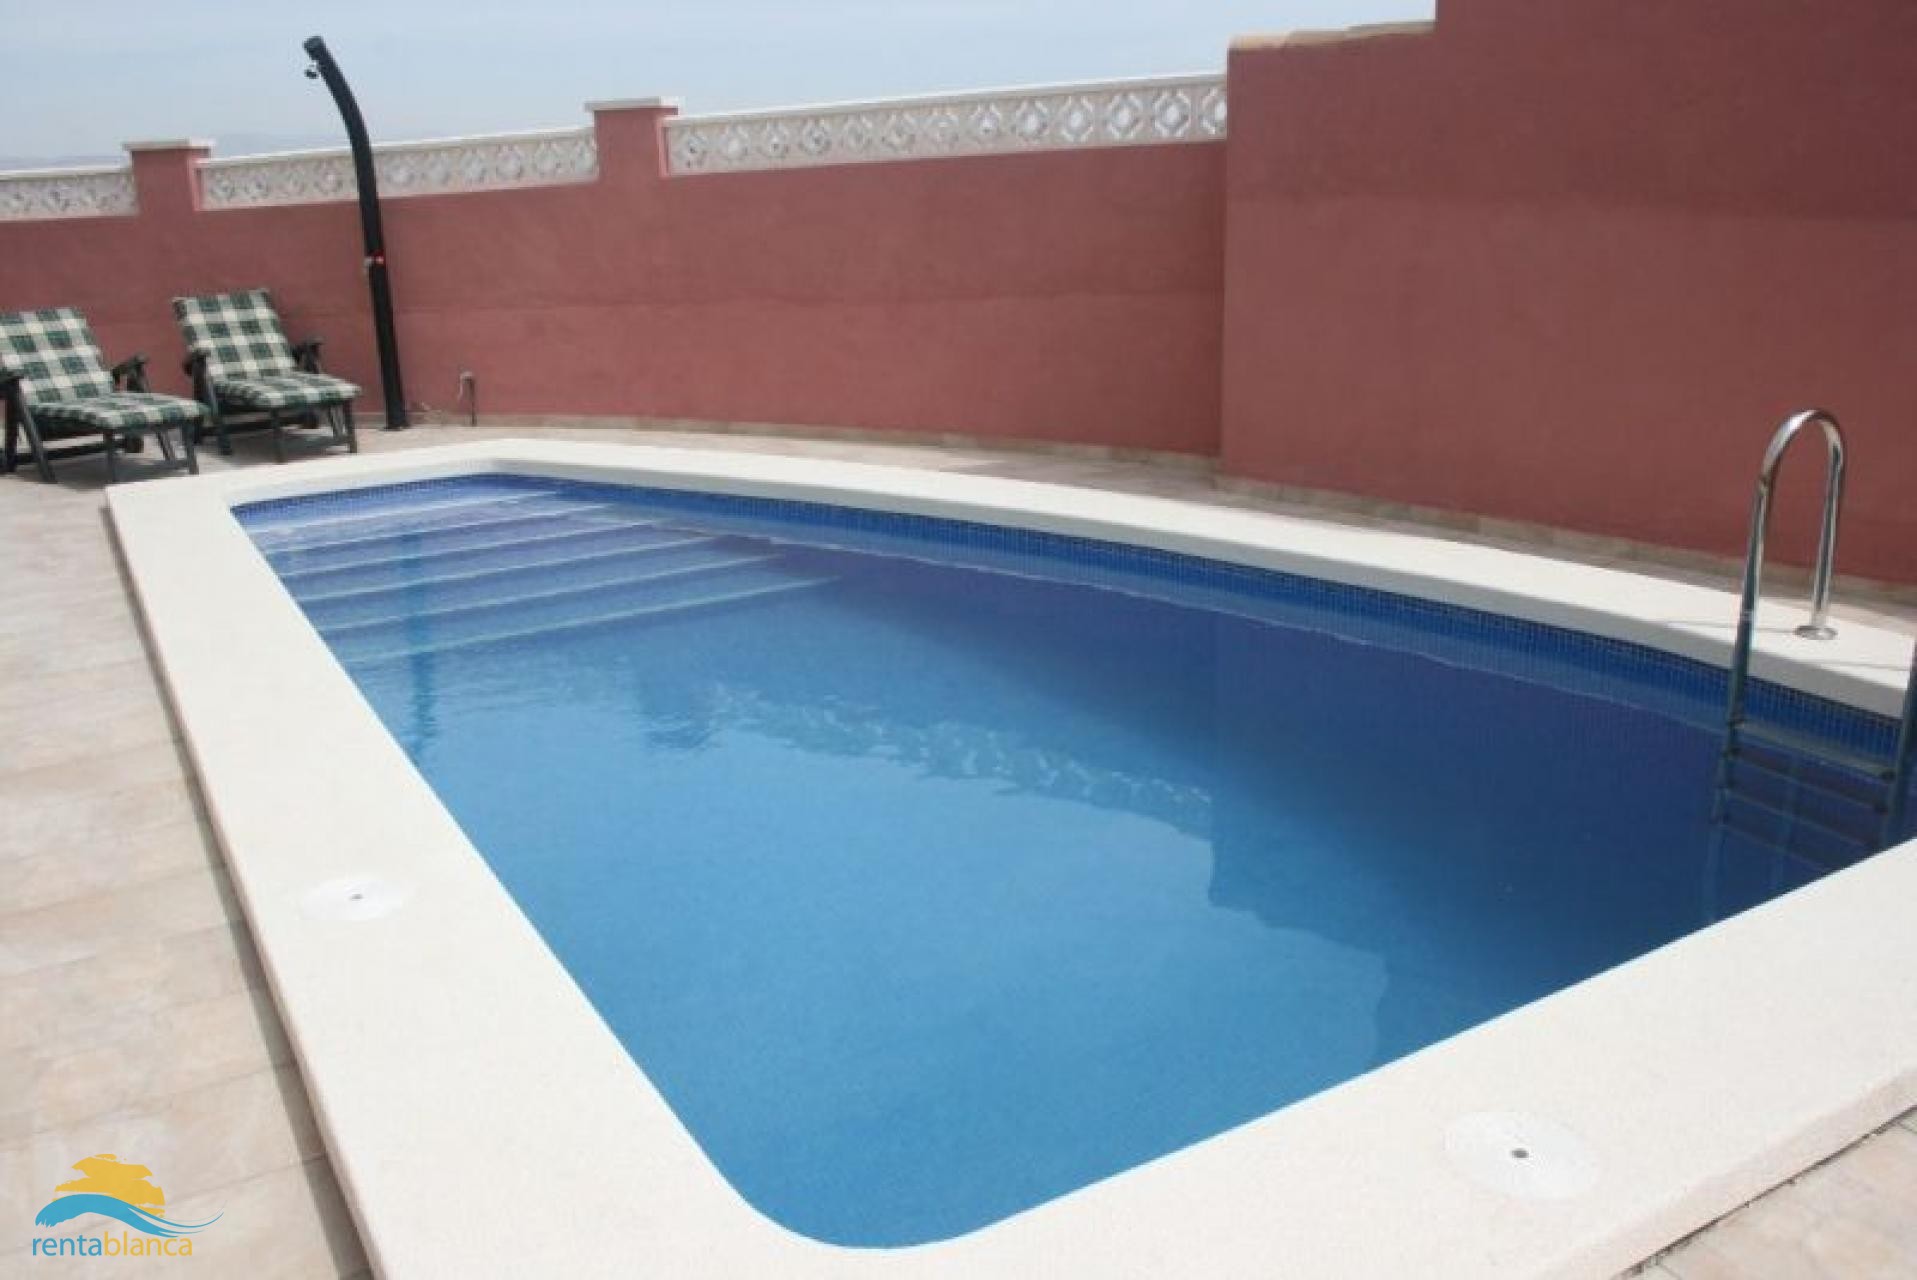 Holiday house with private pool - Rentablanca